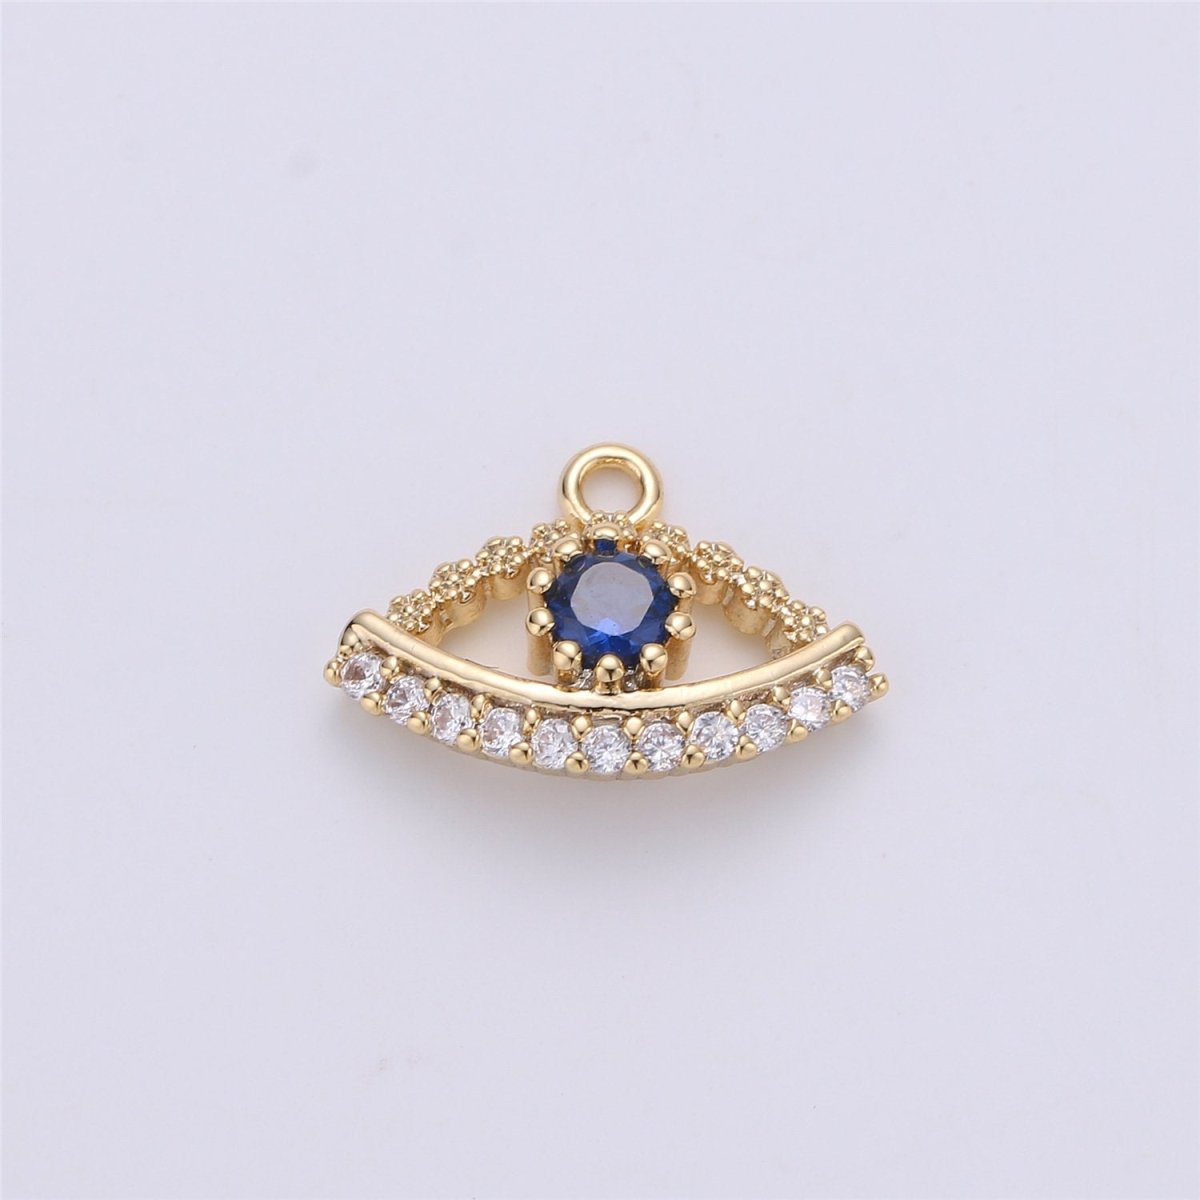 Small Dainty Gold Filled Gold Evil eye Charm Micro Pave Evil Eye Charm Cubic Evil Eye Charm for Bracelet Necklace Earring Charm 14x10mm C-711 - DLUXCA